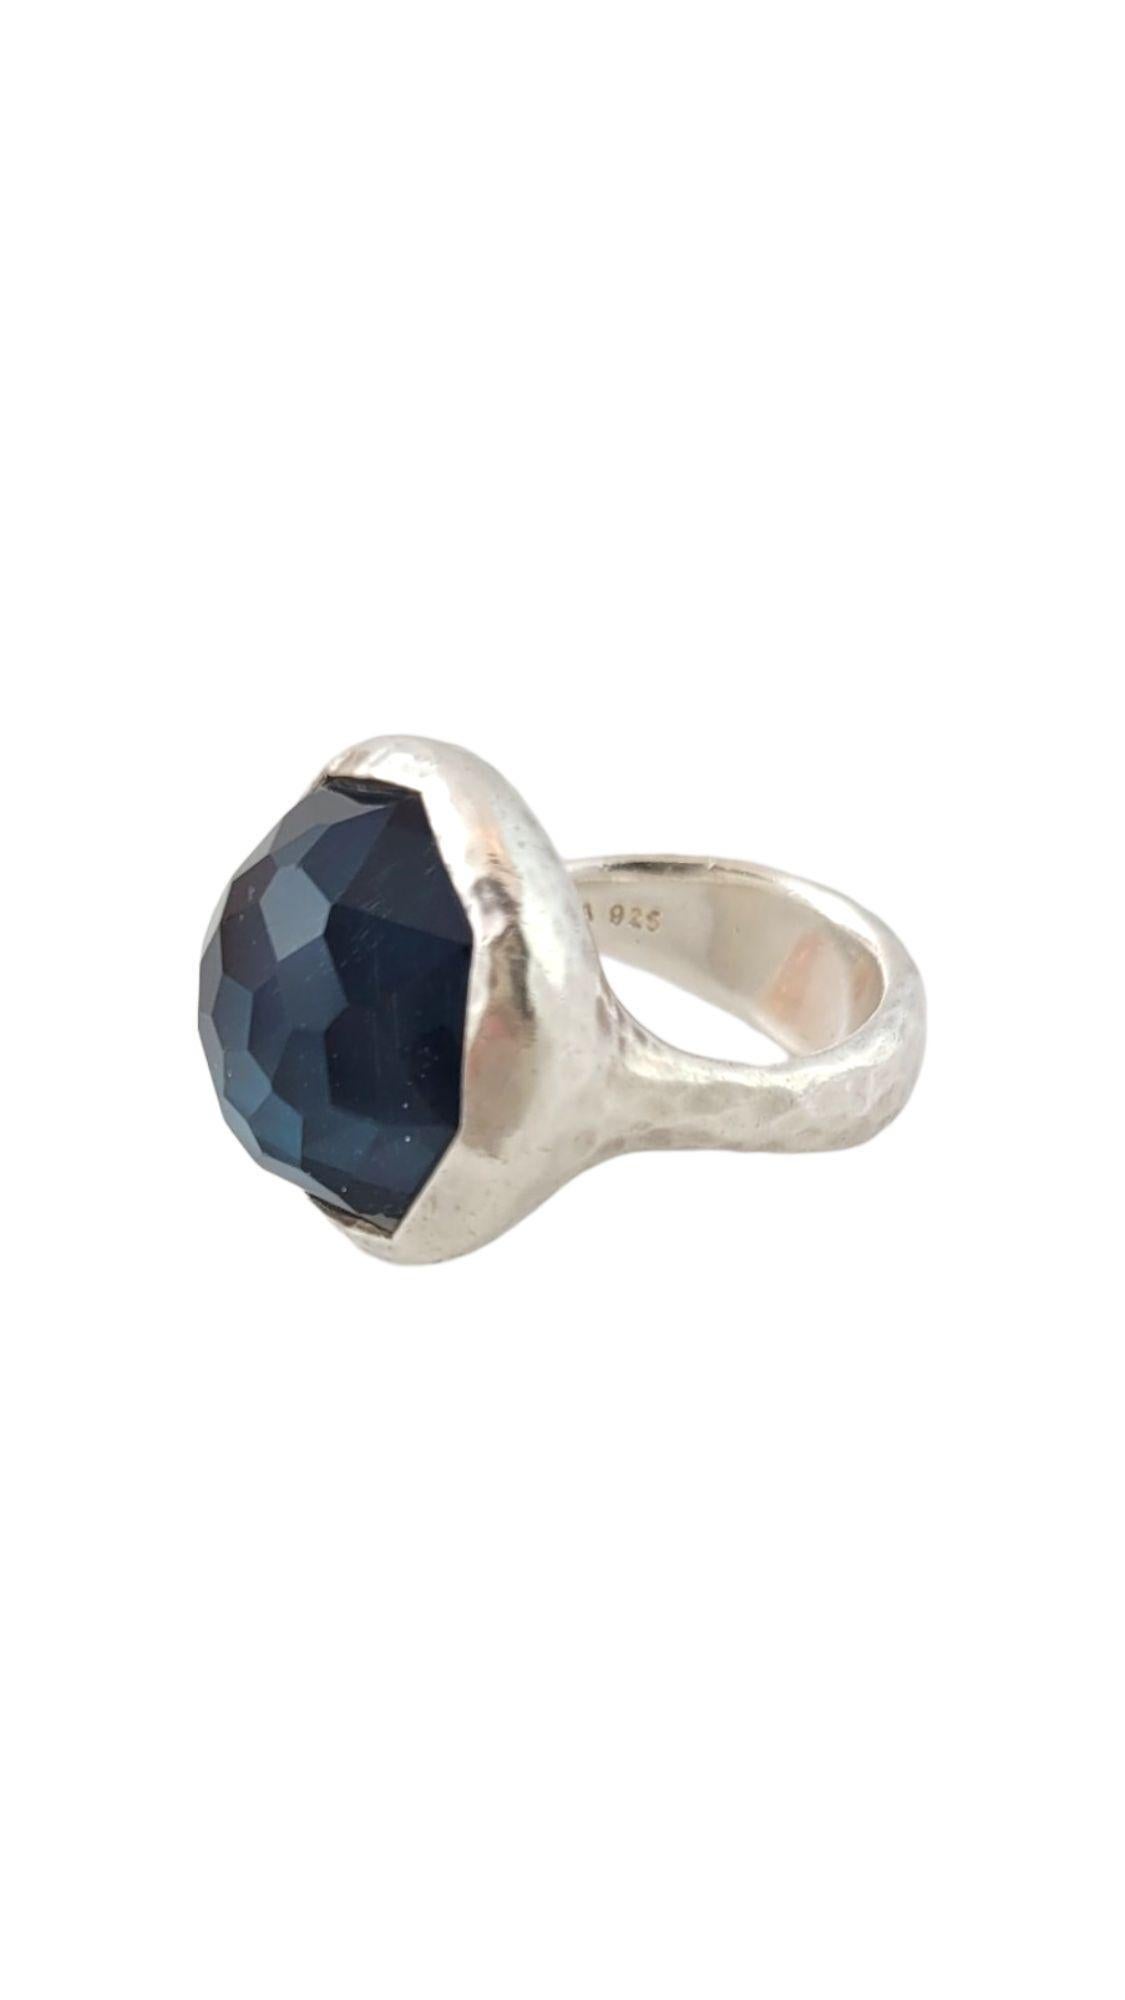 Ippolita 925 Sterling Silver Wonderland Ring Size 7.25

This gorgeous Ippolita ring is crafted from 925 sterling silver and has a gorgeous blue quartz stone!

Ring size: 7.25
Shank: 8.0mm
Front: 21.4mm X 21.3mm X 11.7mm

Weight: 19.41 g/ 12.5